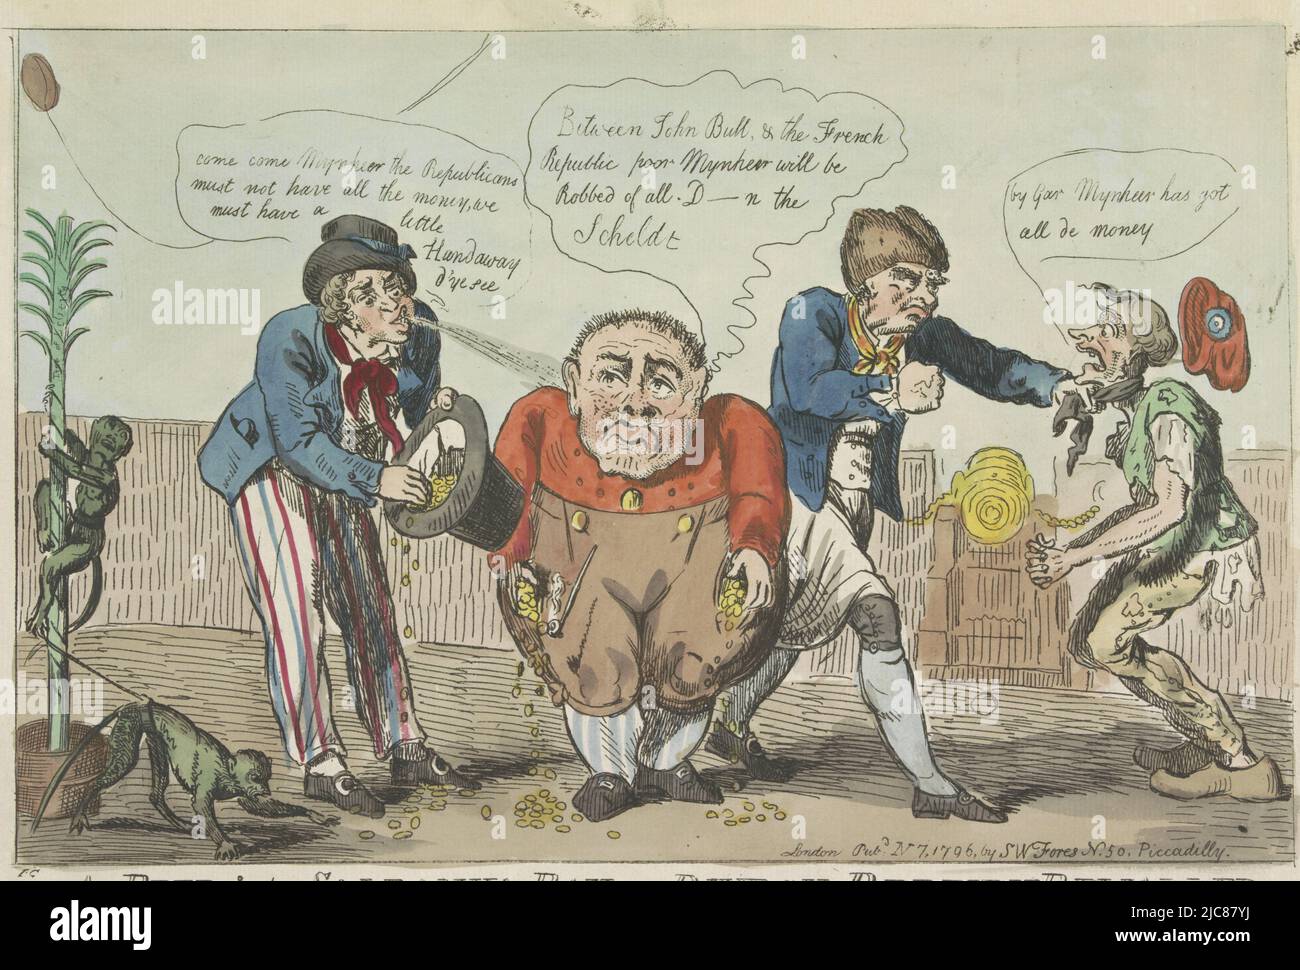 In a fort, a fat Dutchman with pockets filled with gold coins is robbed of his money by an English sailor and spit in the face. Another Englishman threatens a Frenchman dressed in rags. On the left, a tree of liberty with two monkeys. Cartoon on the surrender of the Batavian fleet of nine ships to the English in Saldanha Bay on the Western Cape of South Africa on August 17, 1796. Cartoon on the capitulation of the Batavian fleet in Saldanha Bay, 1796 A Peep into Saldanha Bay or Dutch Perfidy Rewarded , print maker: Isaac Cruikshank, (mentioned on object), publisher: Samuel W. Fores, (mentioned Stock Photo